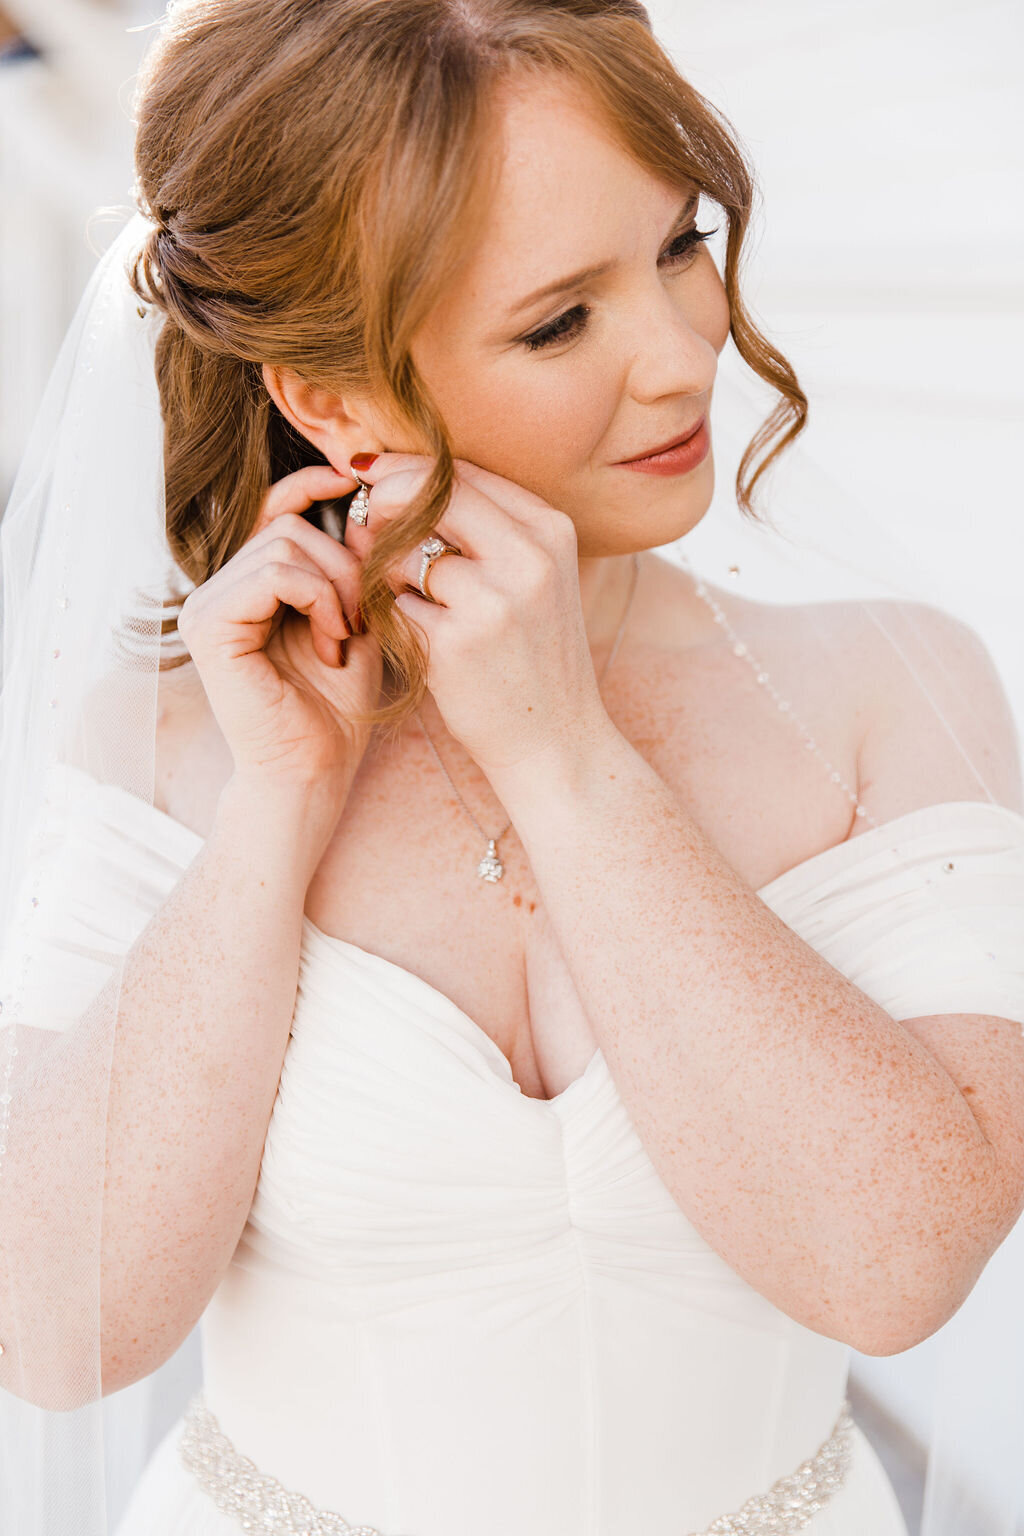 Elegant shot of the bride putting on her earrings, a moment that captures the intricate details and personal touches of her bridal attire